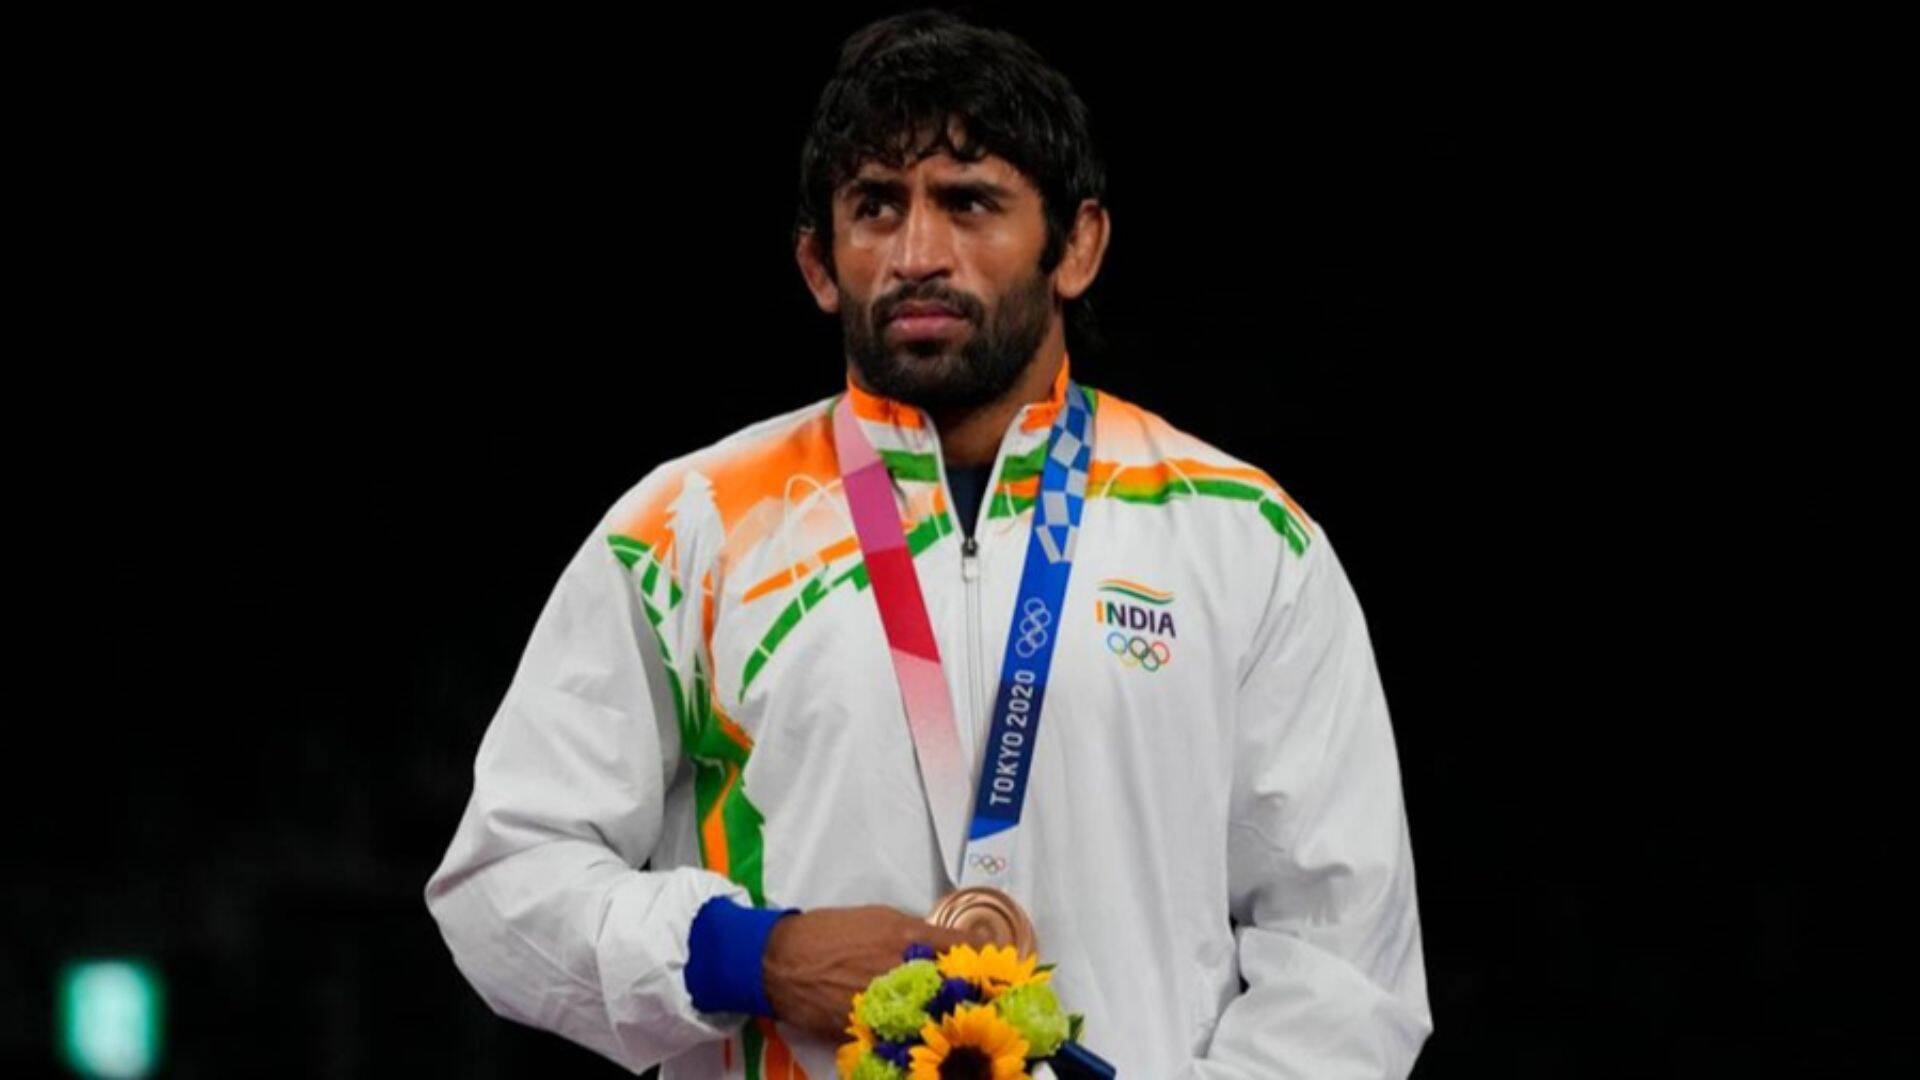 Bajrang Punia Suspended From UWW For Alleged Anti-Doping Rule Violation (ADRV)